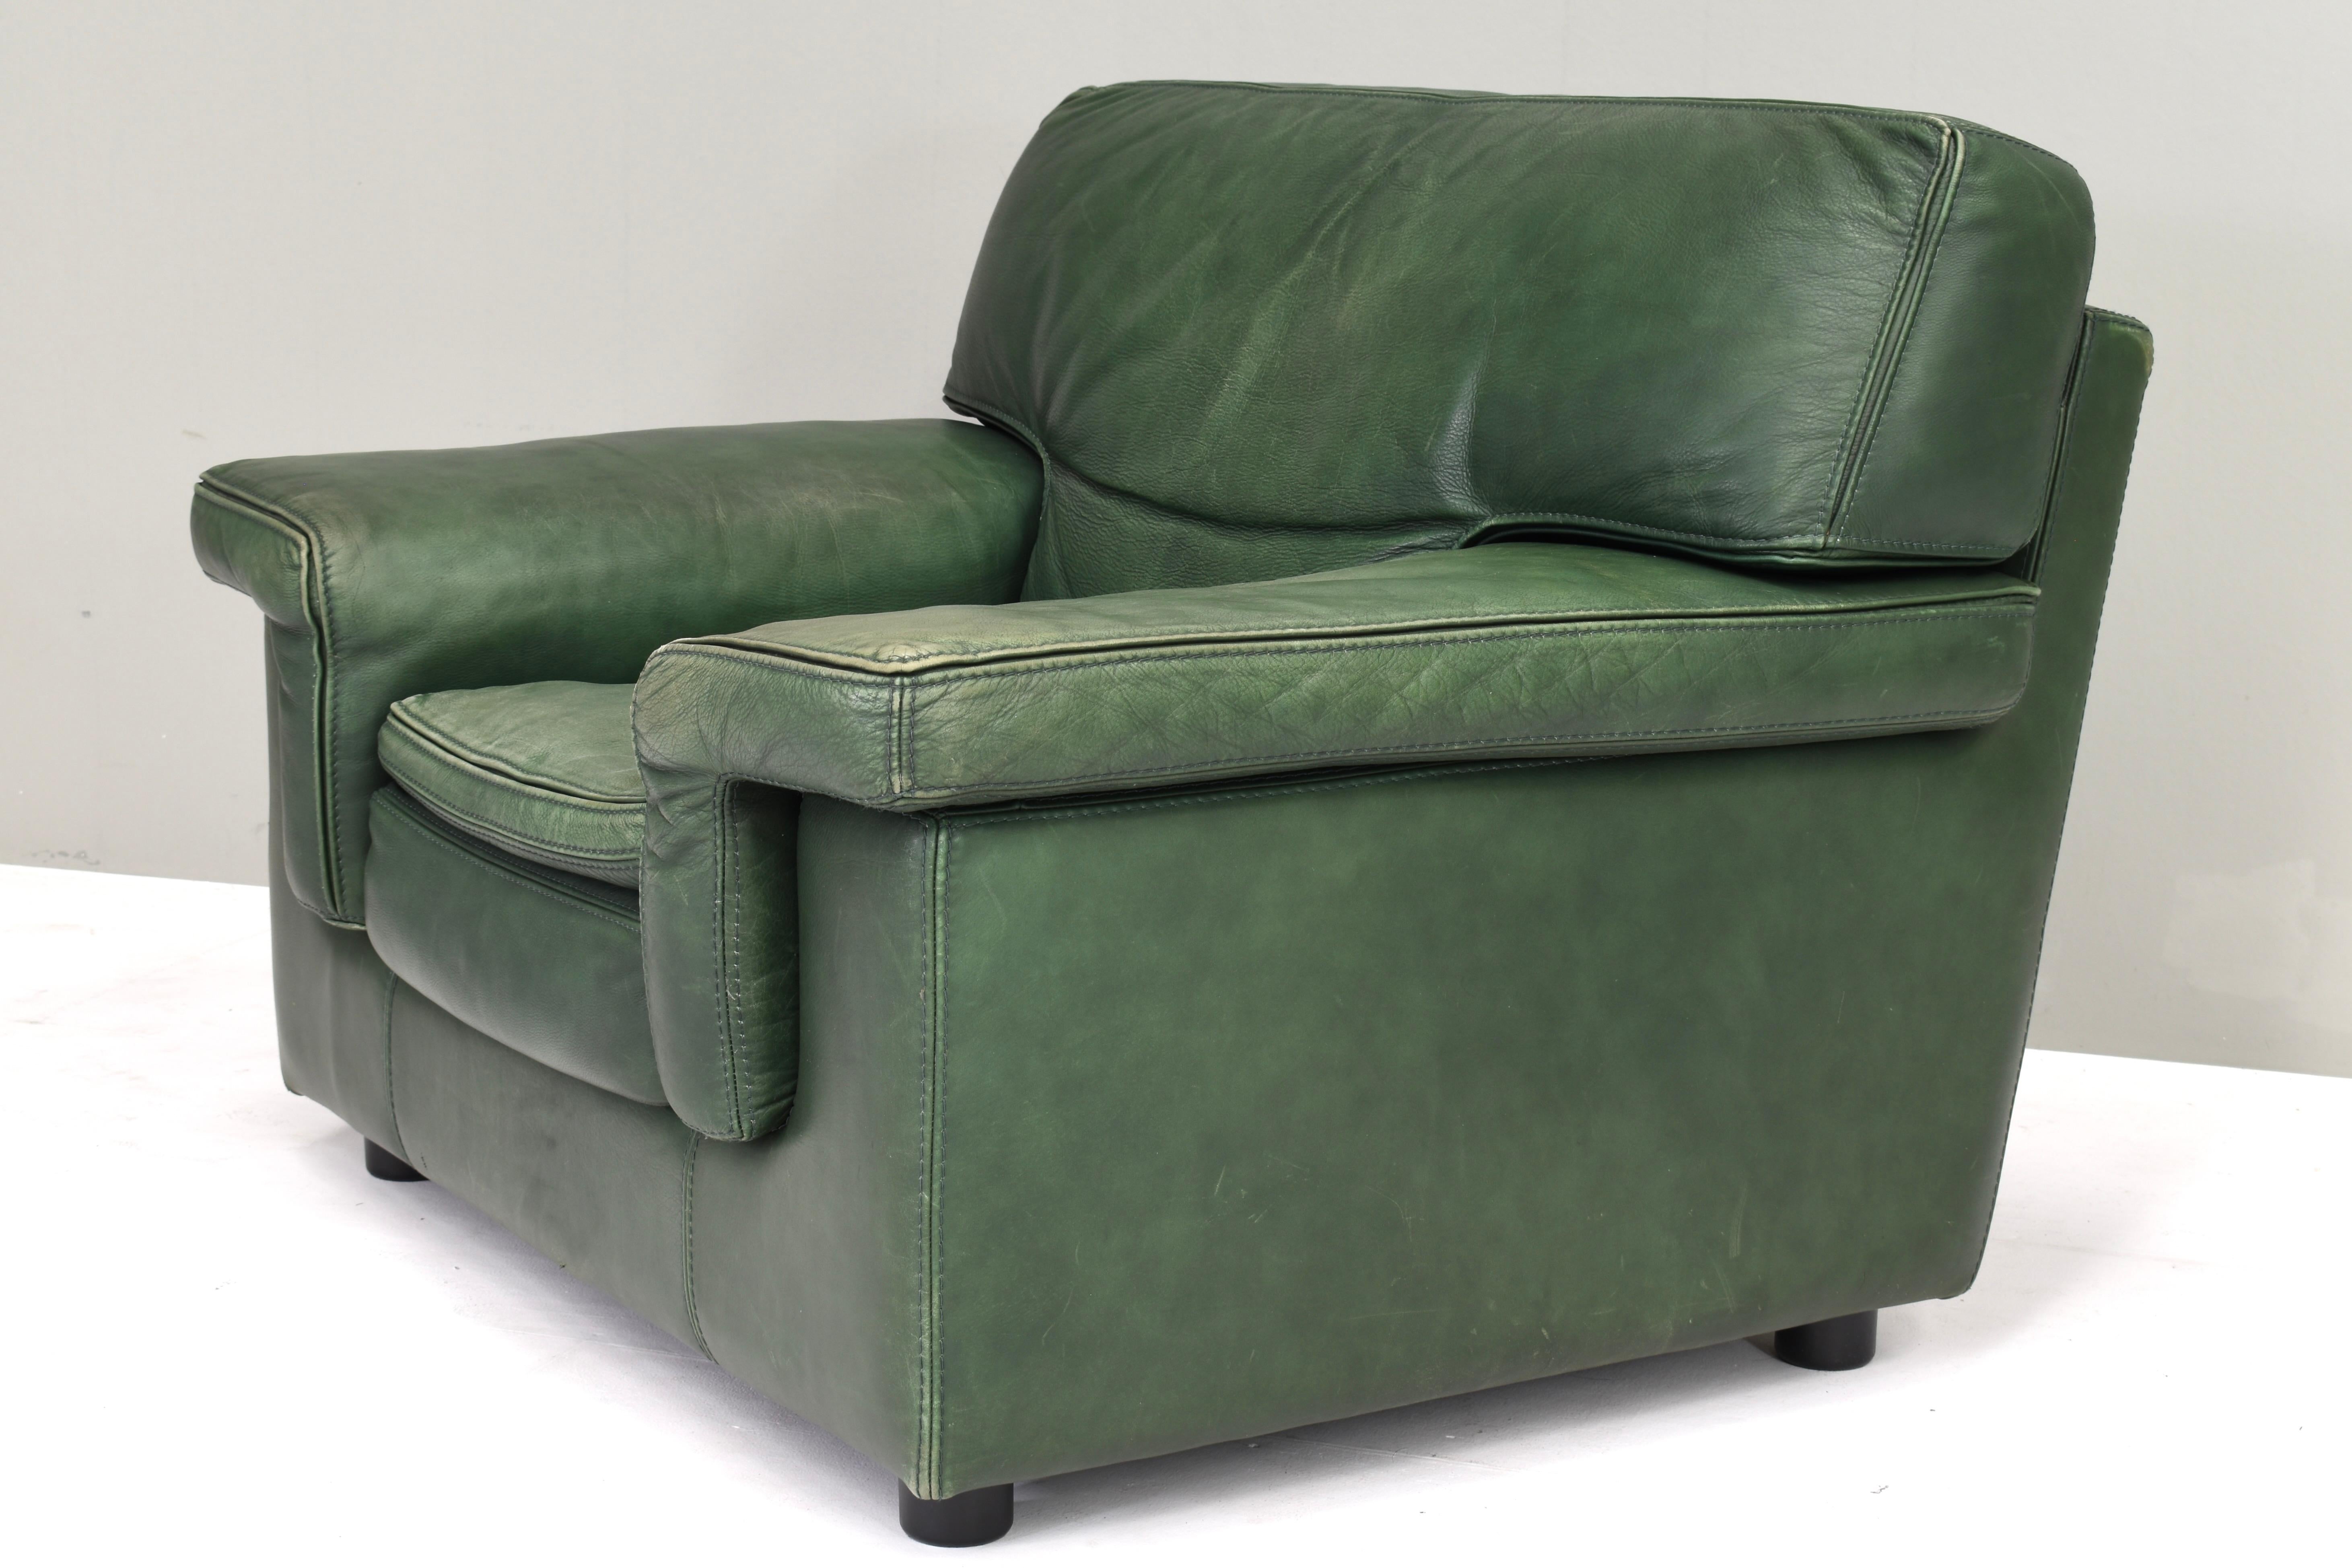 Italian Roche Bobois Lounge Armchair in Original Green Patinated Leather – circa 1970 For Sale